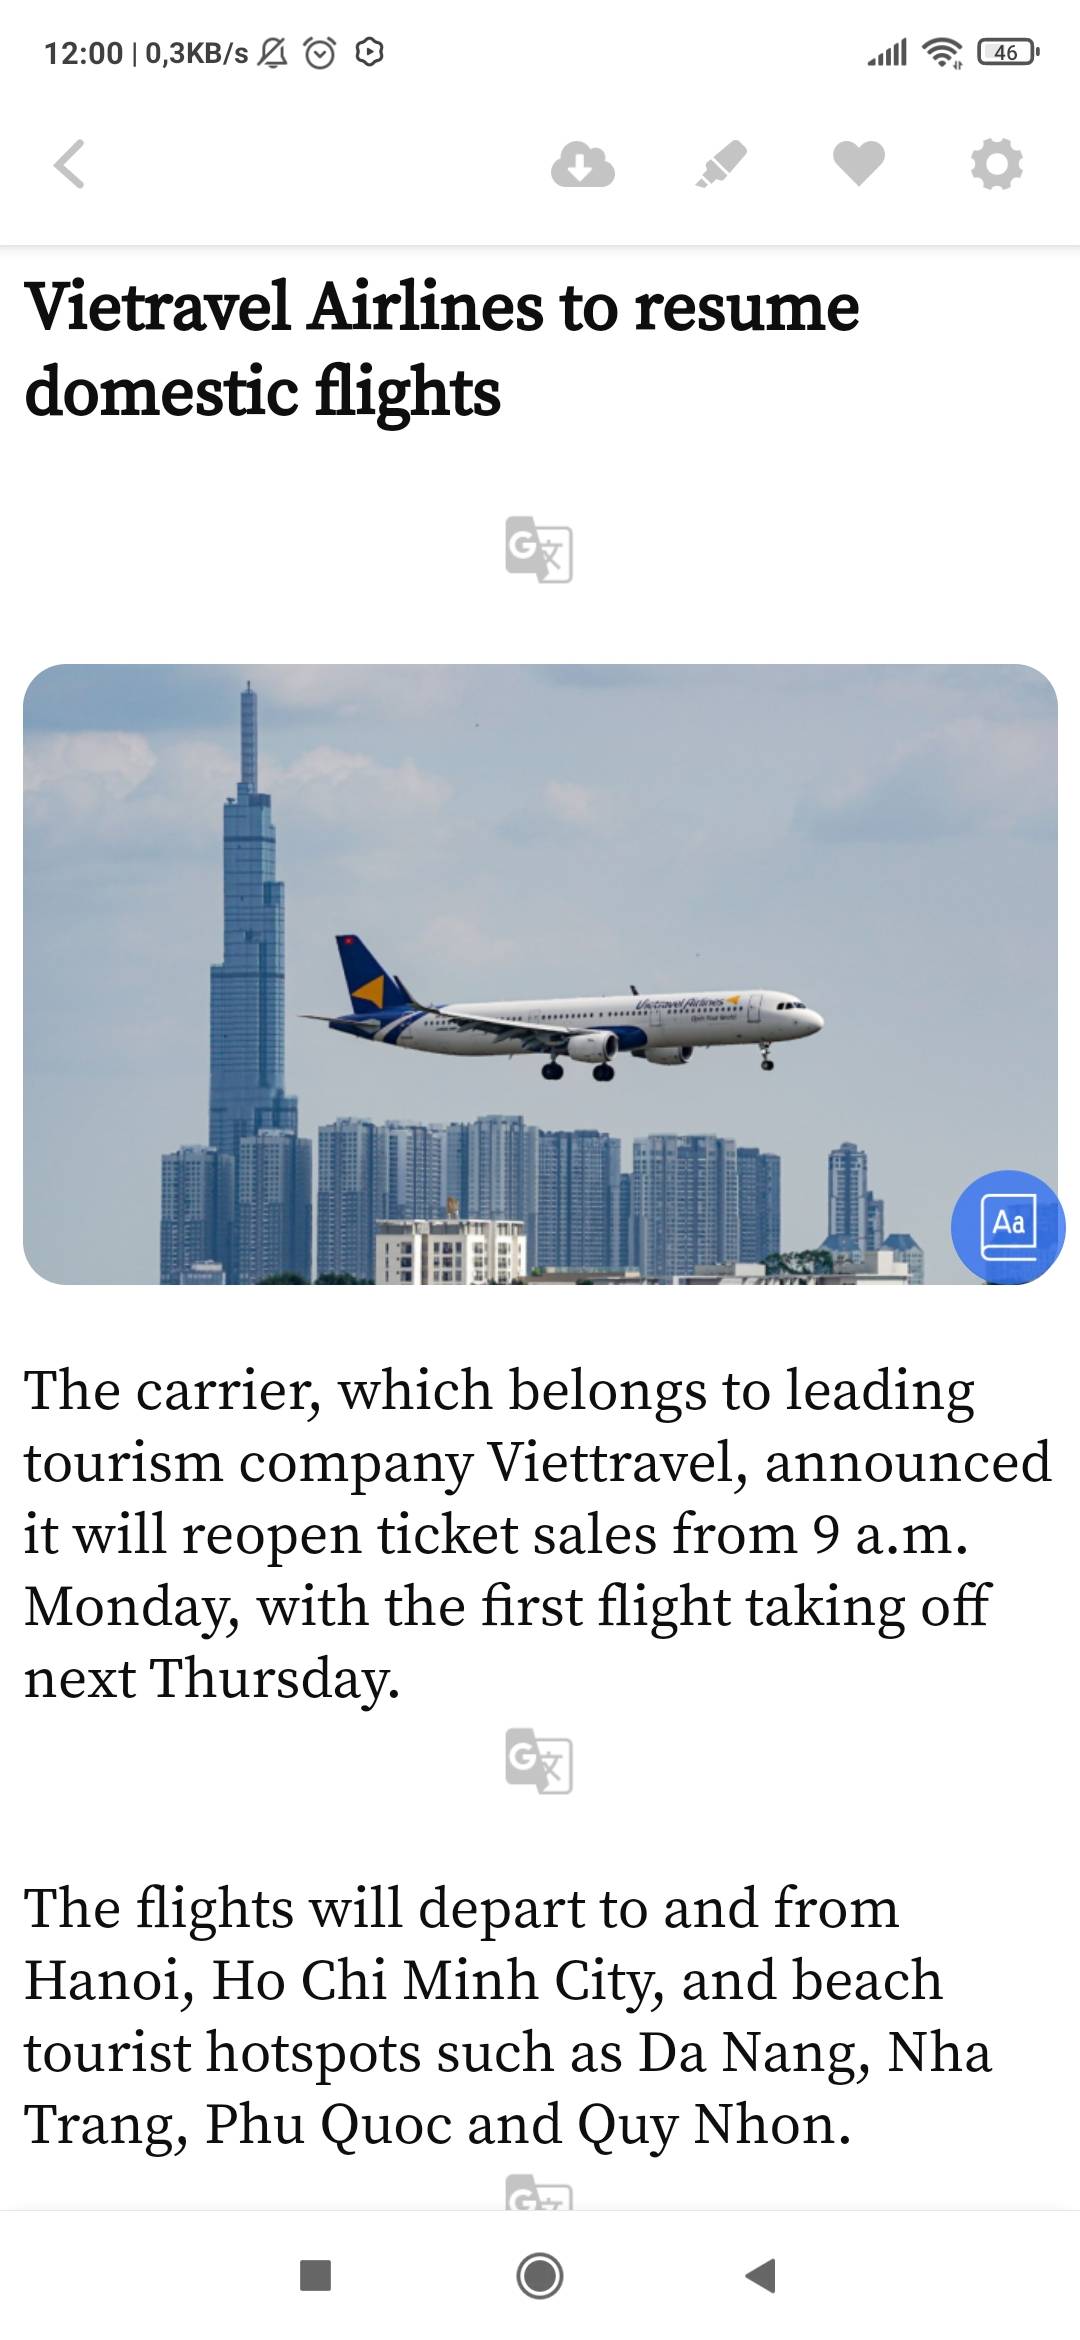 Italki I Haven T Known That Vietnam Already Has A New Airline Which Is Called Vietravel